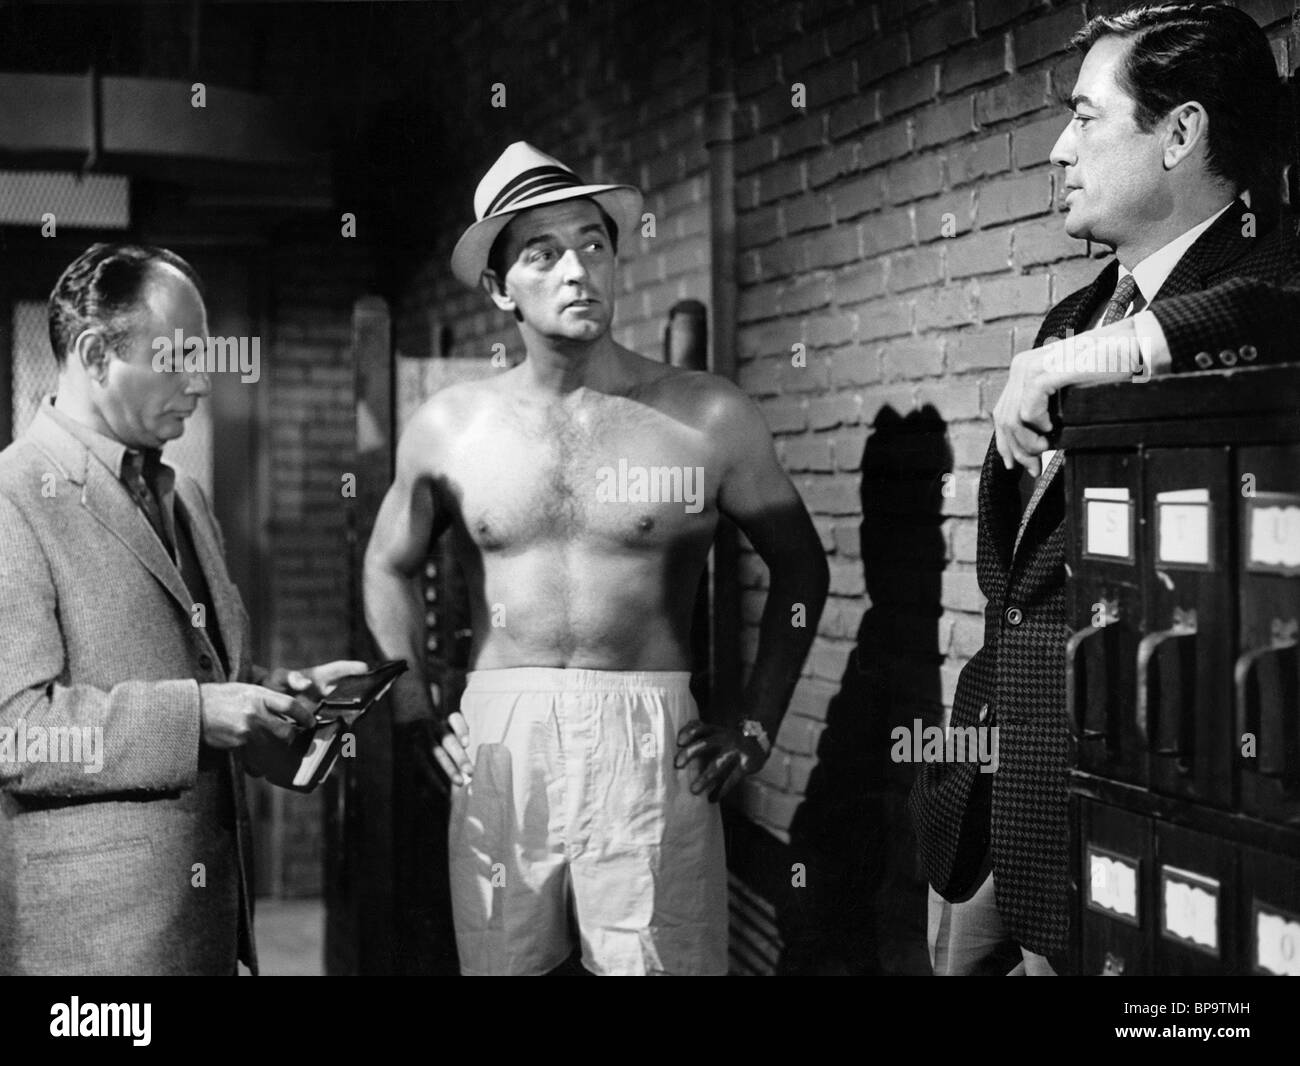 Mitchum agrees to a strip search before Martin Balsam and Gregory Peck. He's been lifting.